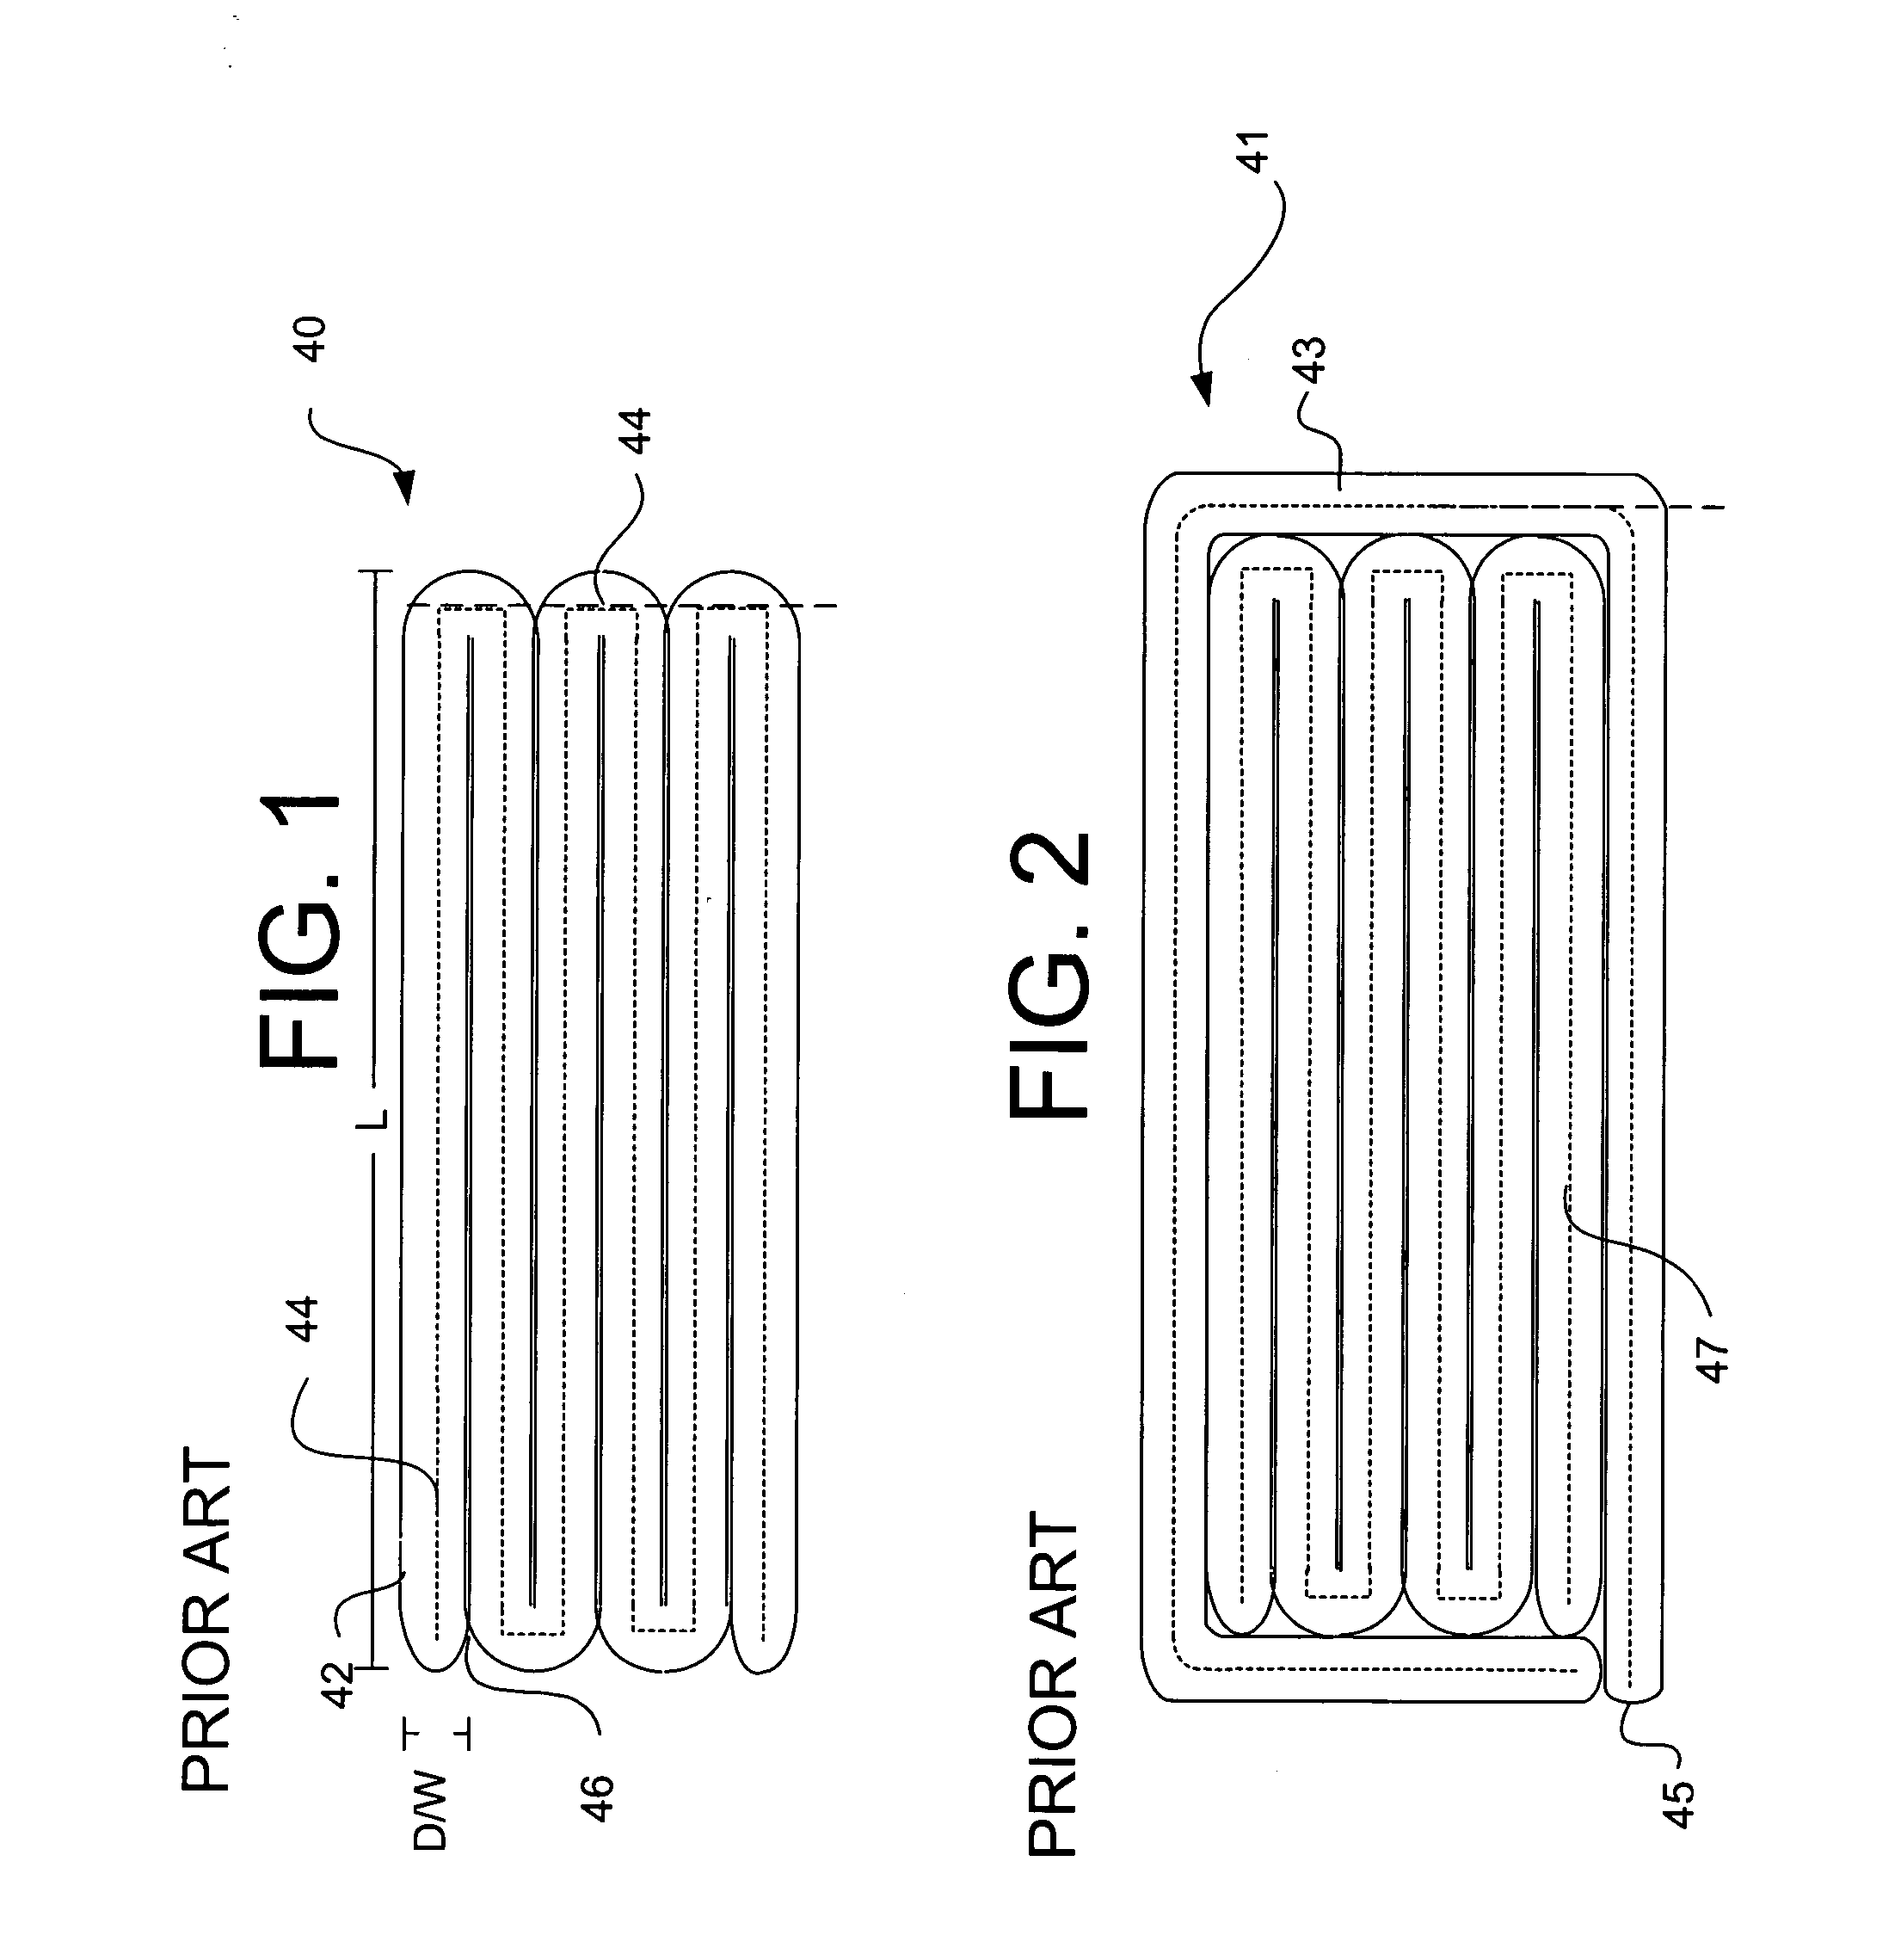 Procedures for rapid build and improved surface characteristics in layered manufacture